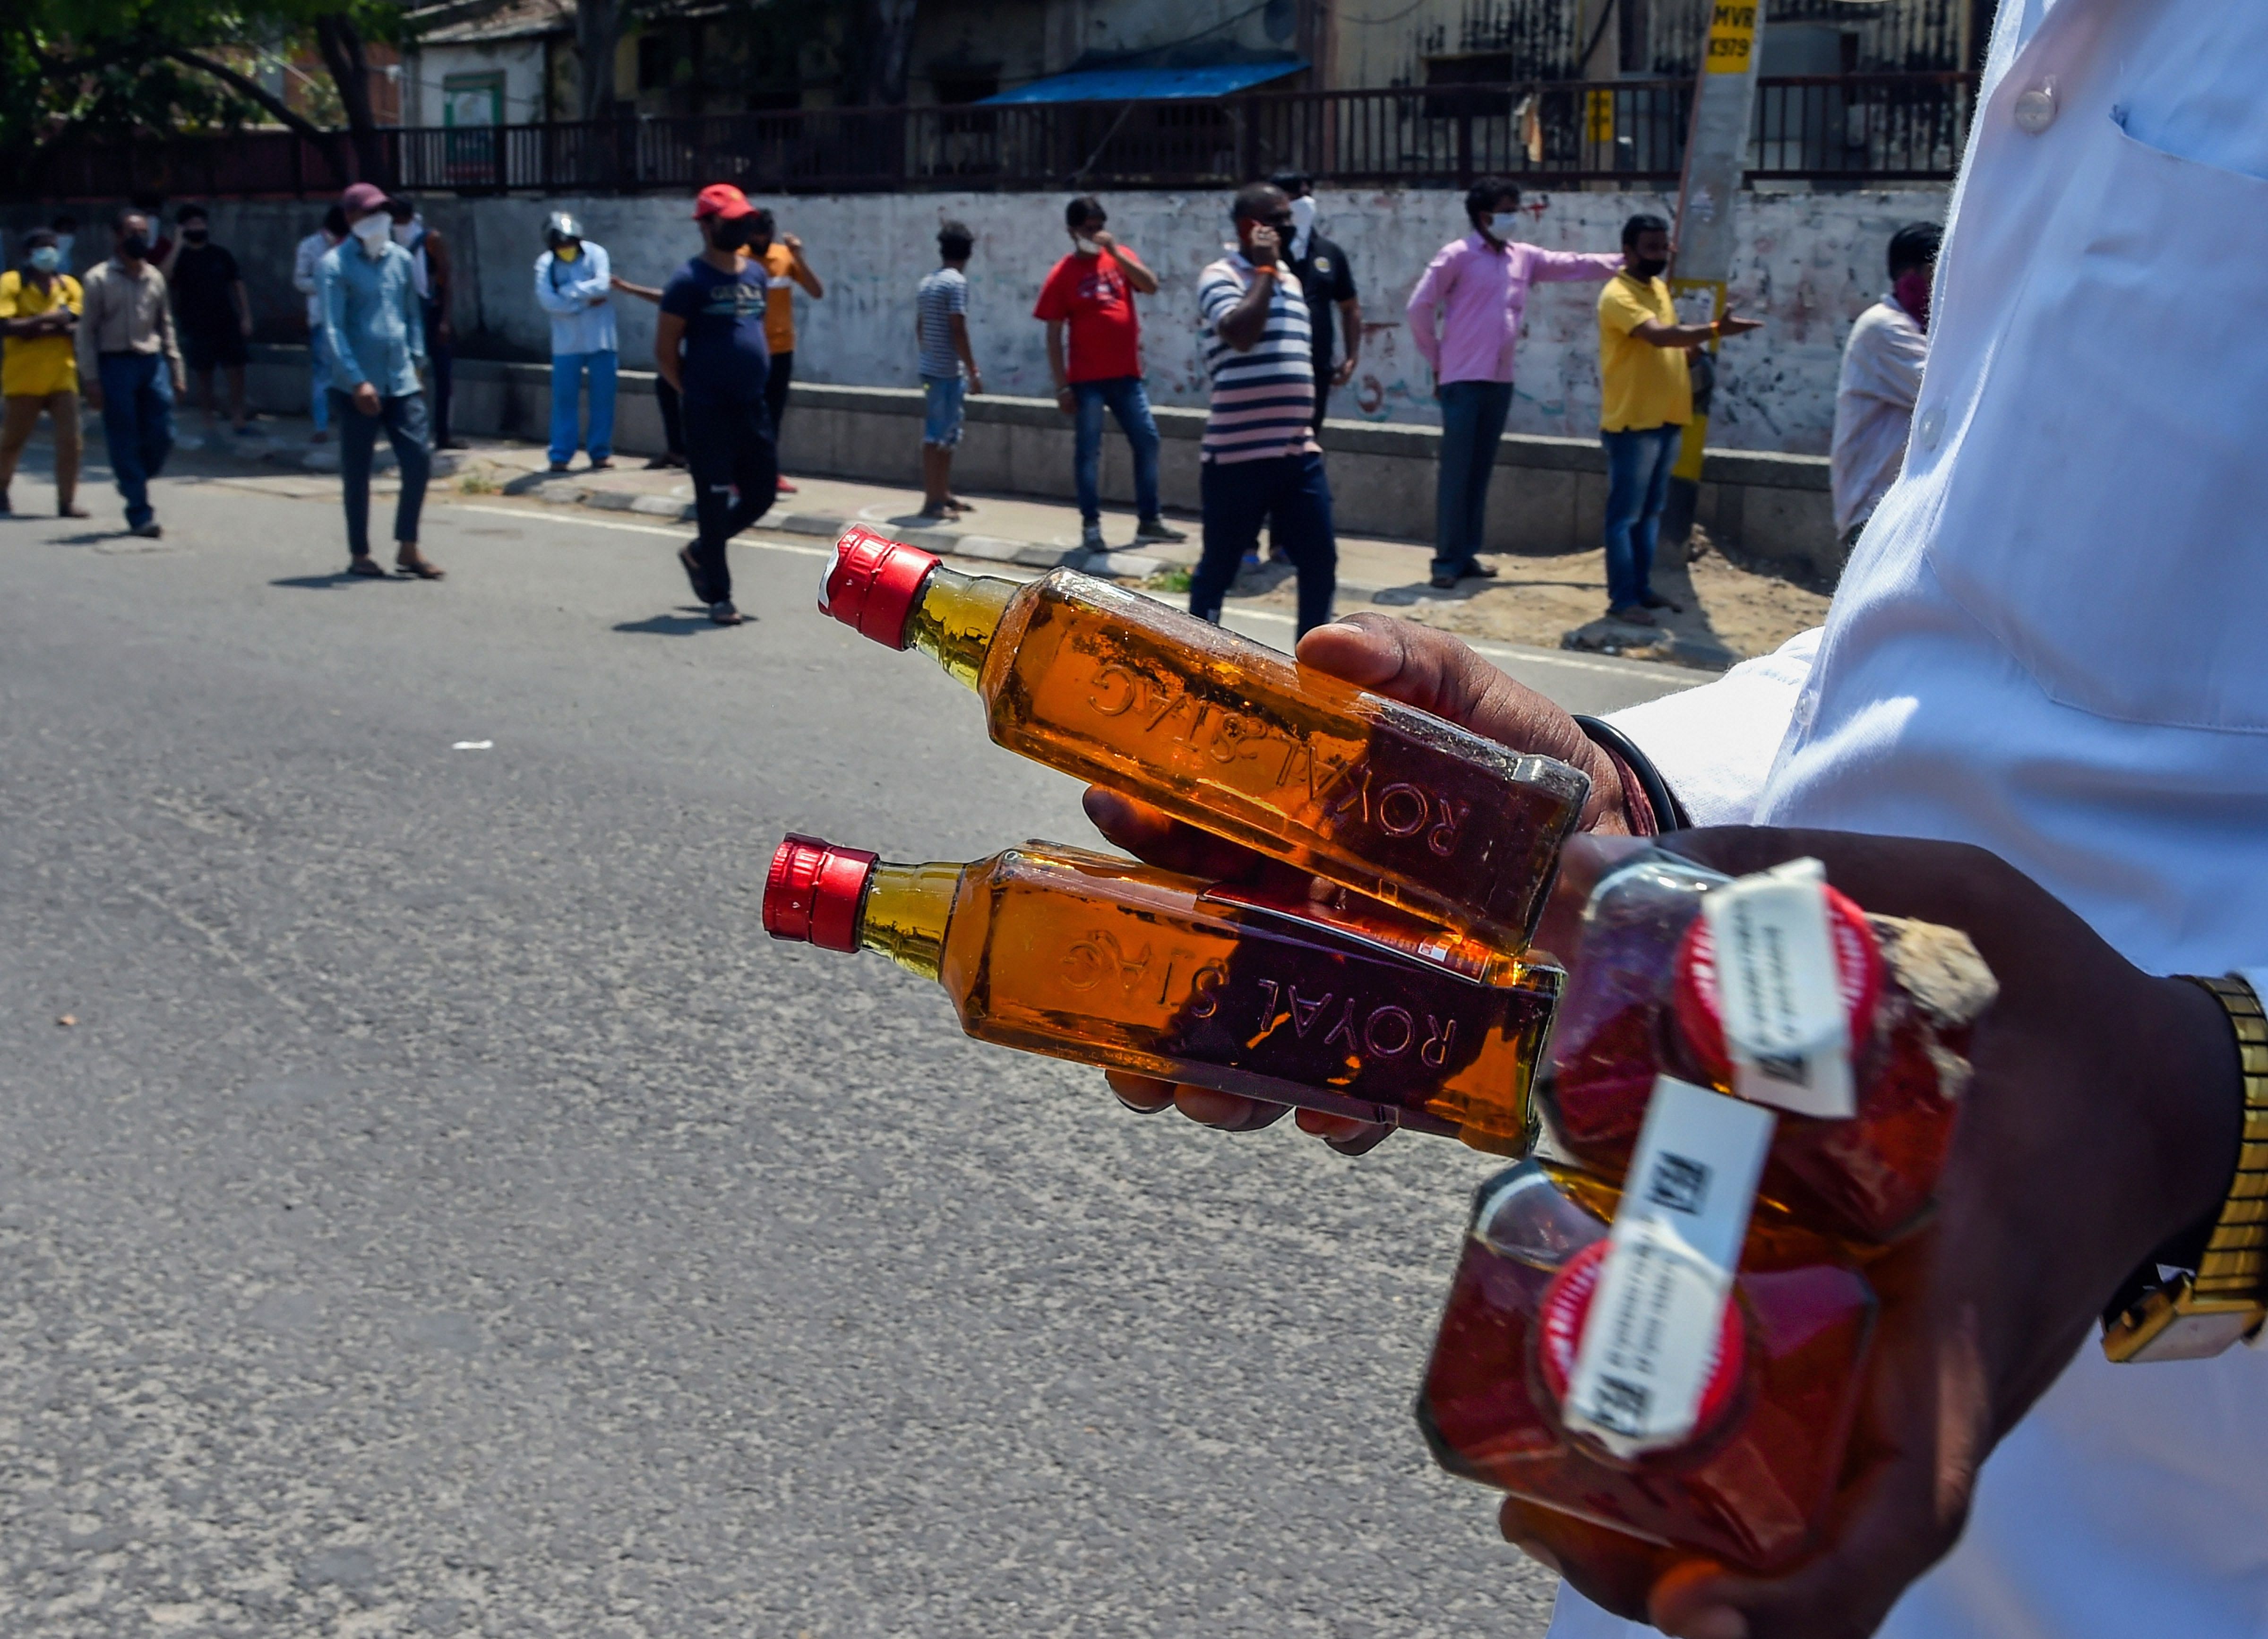 The purpose was to avoid crowding at liquor stores and prevent the spread of coronavirus, the official said. (Credit: PTI Photo)